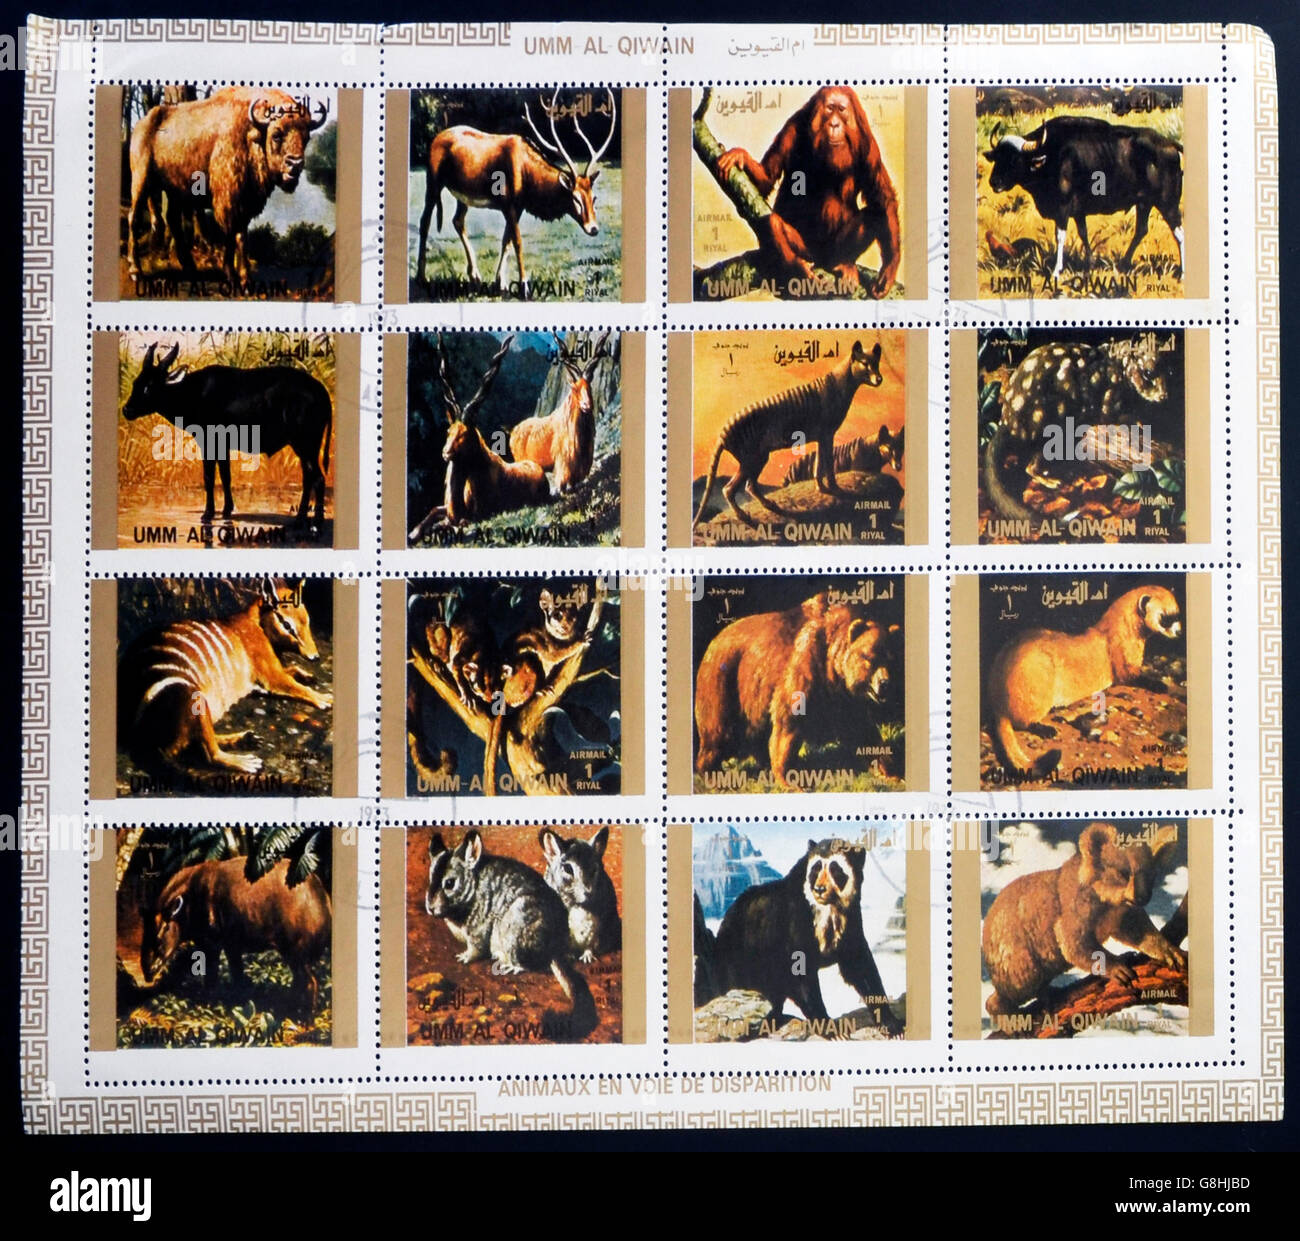 UMM AL QIWAIN - CIRCA 1973: Collection stamps printed in Umm al Qiwain shows animals dying out, circa 1973 Stock Photo